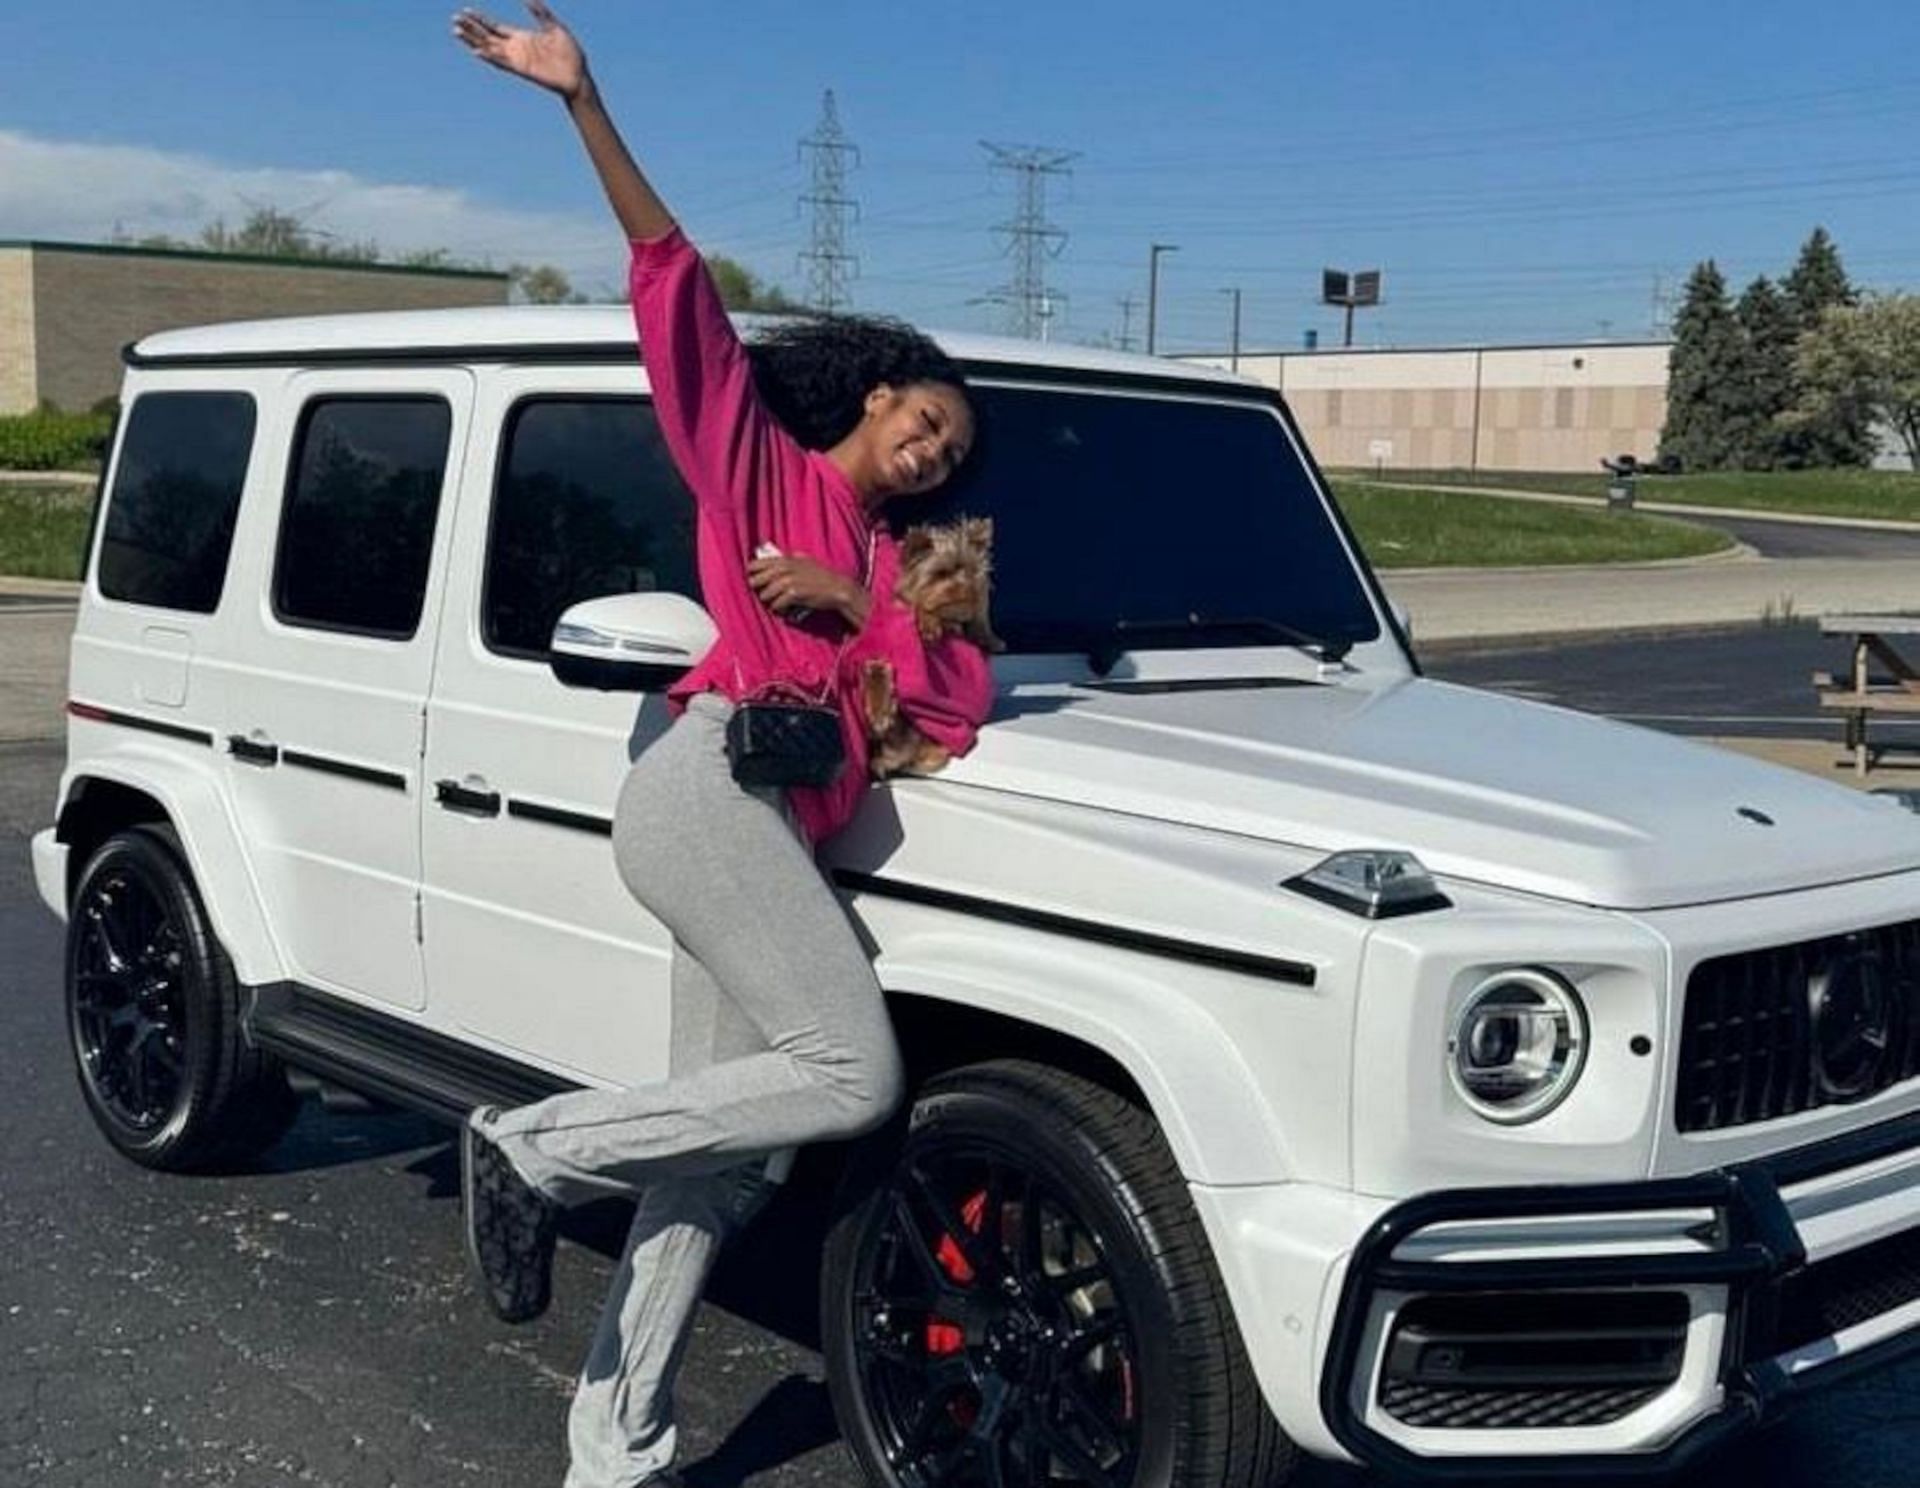 Chicago Sky rookie Angel Reese shows off her new luxury SUV on her Instagram story, via @angelreese5 IG.